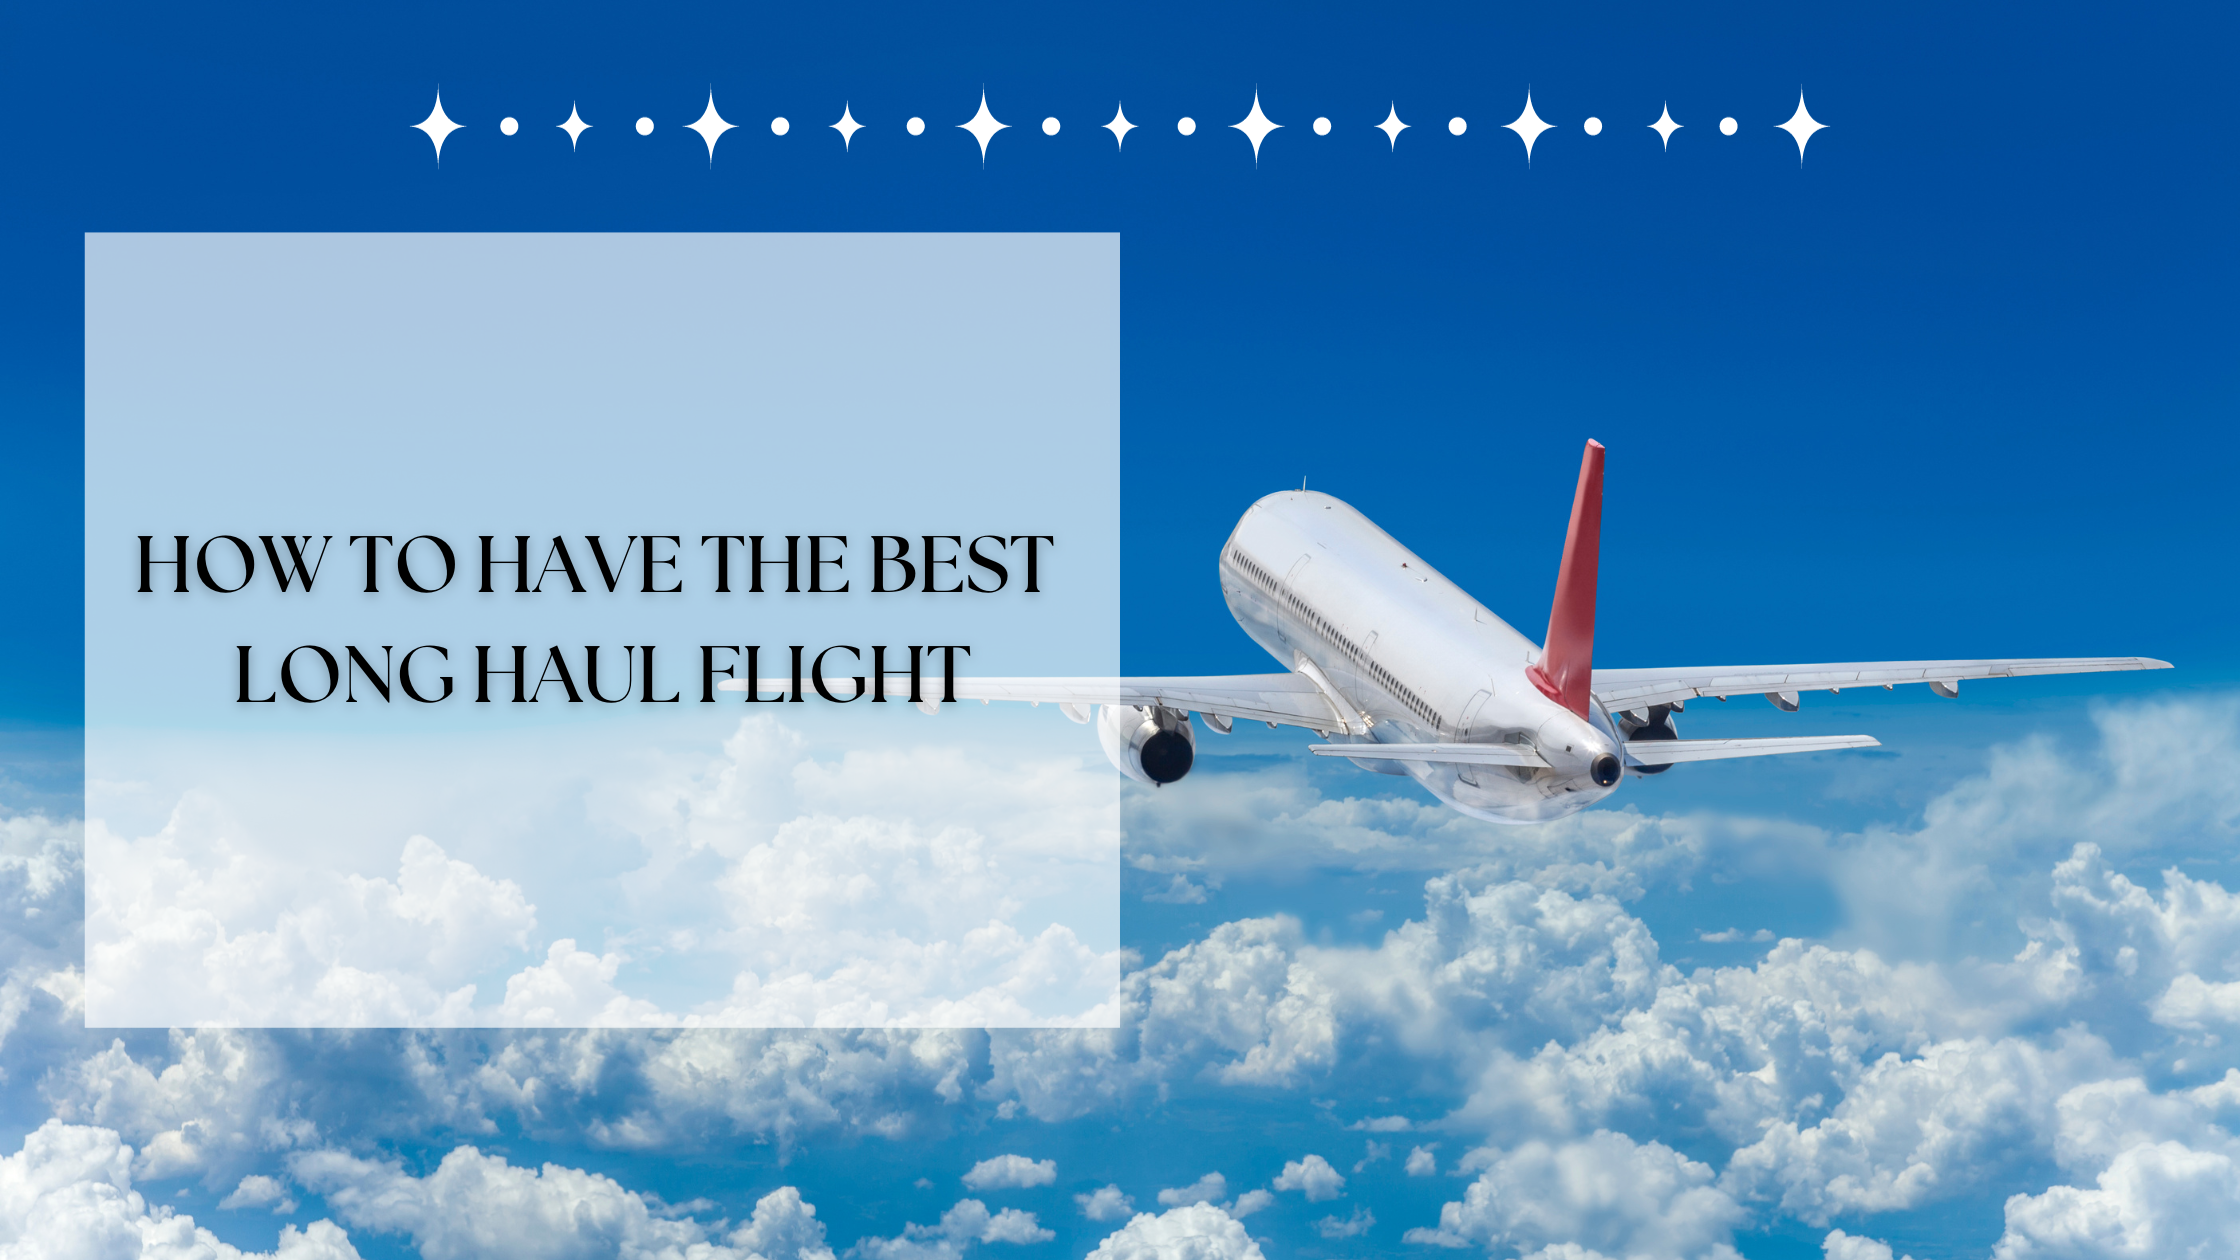 How to Have the Best Long Haul Flight